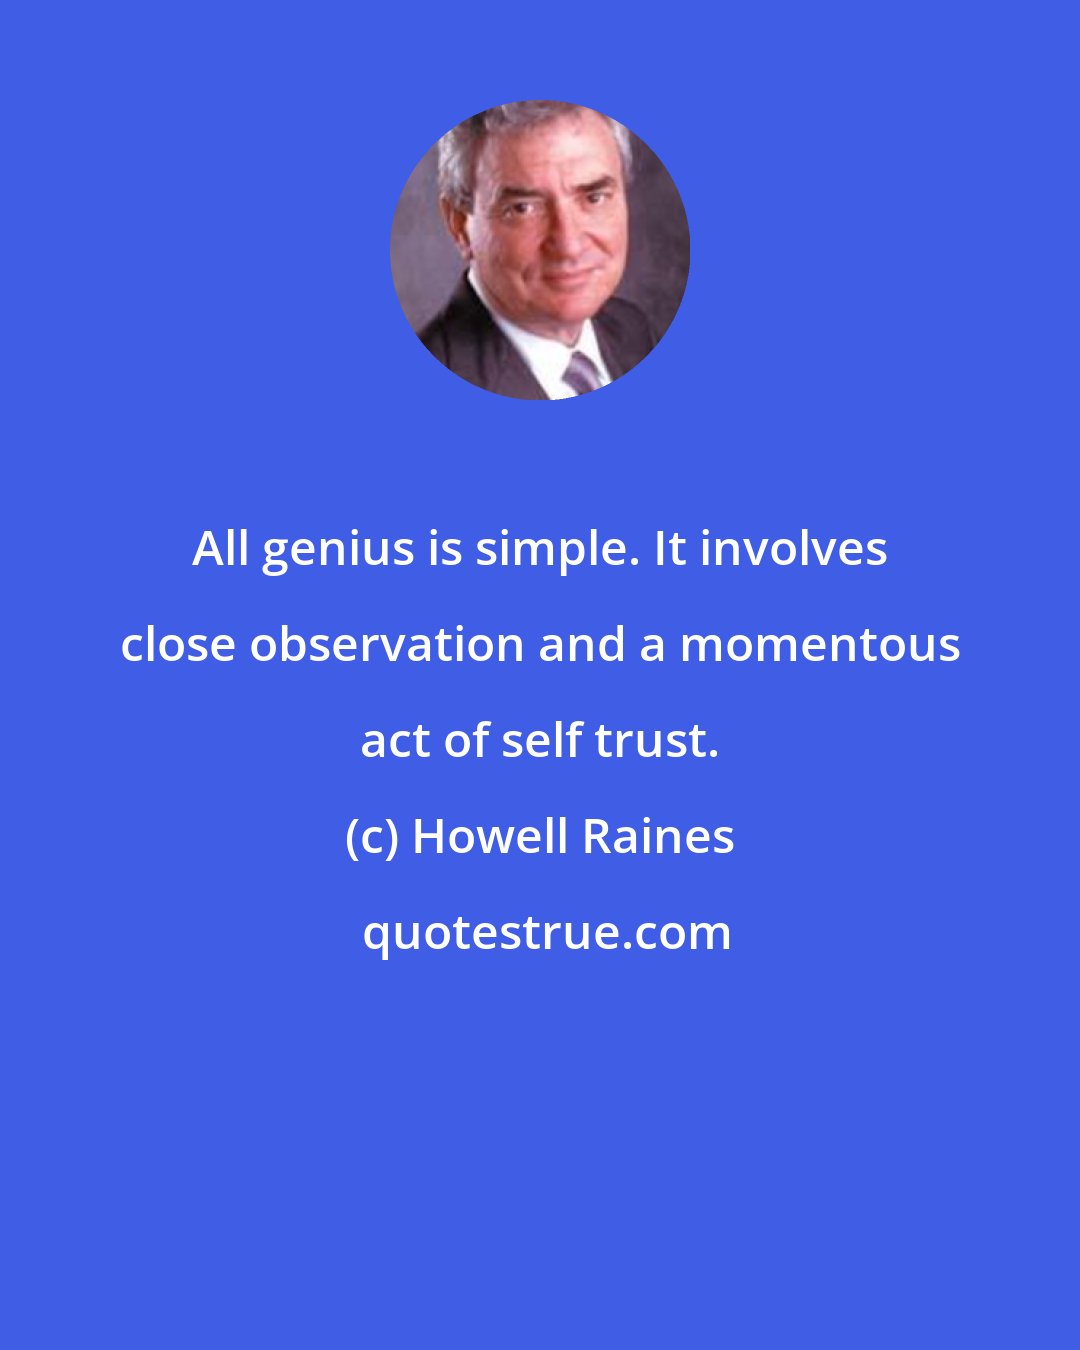 Howell Raines: All genius is simple. It involves close observation and a momentous act of self trust.